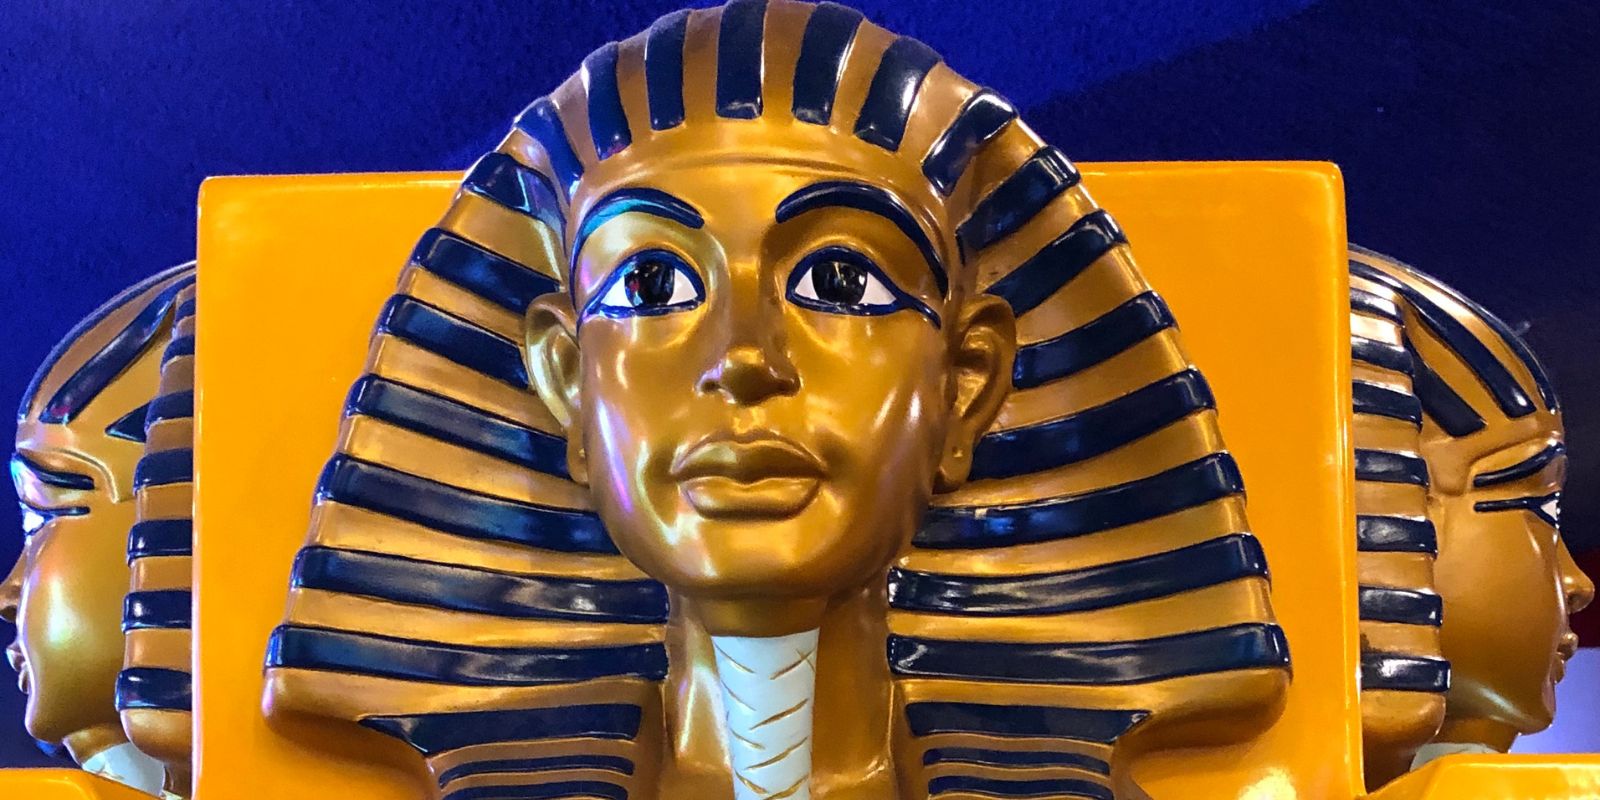 February 16th: “King Tut” & Tomb Discovered